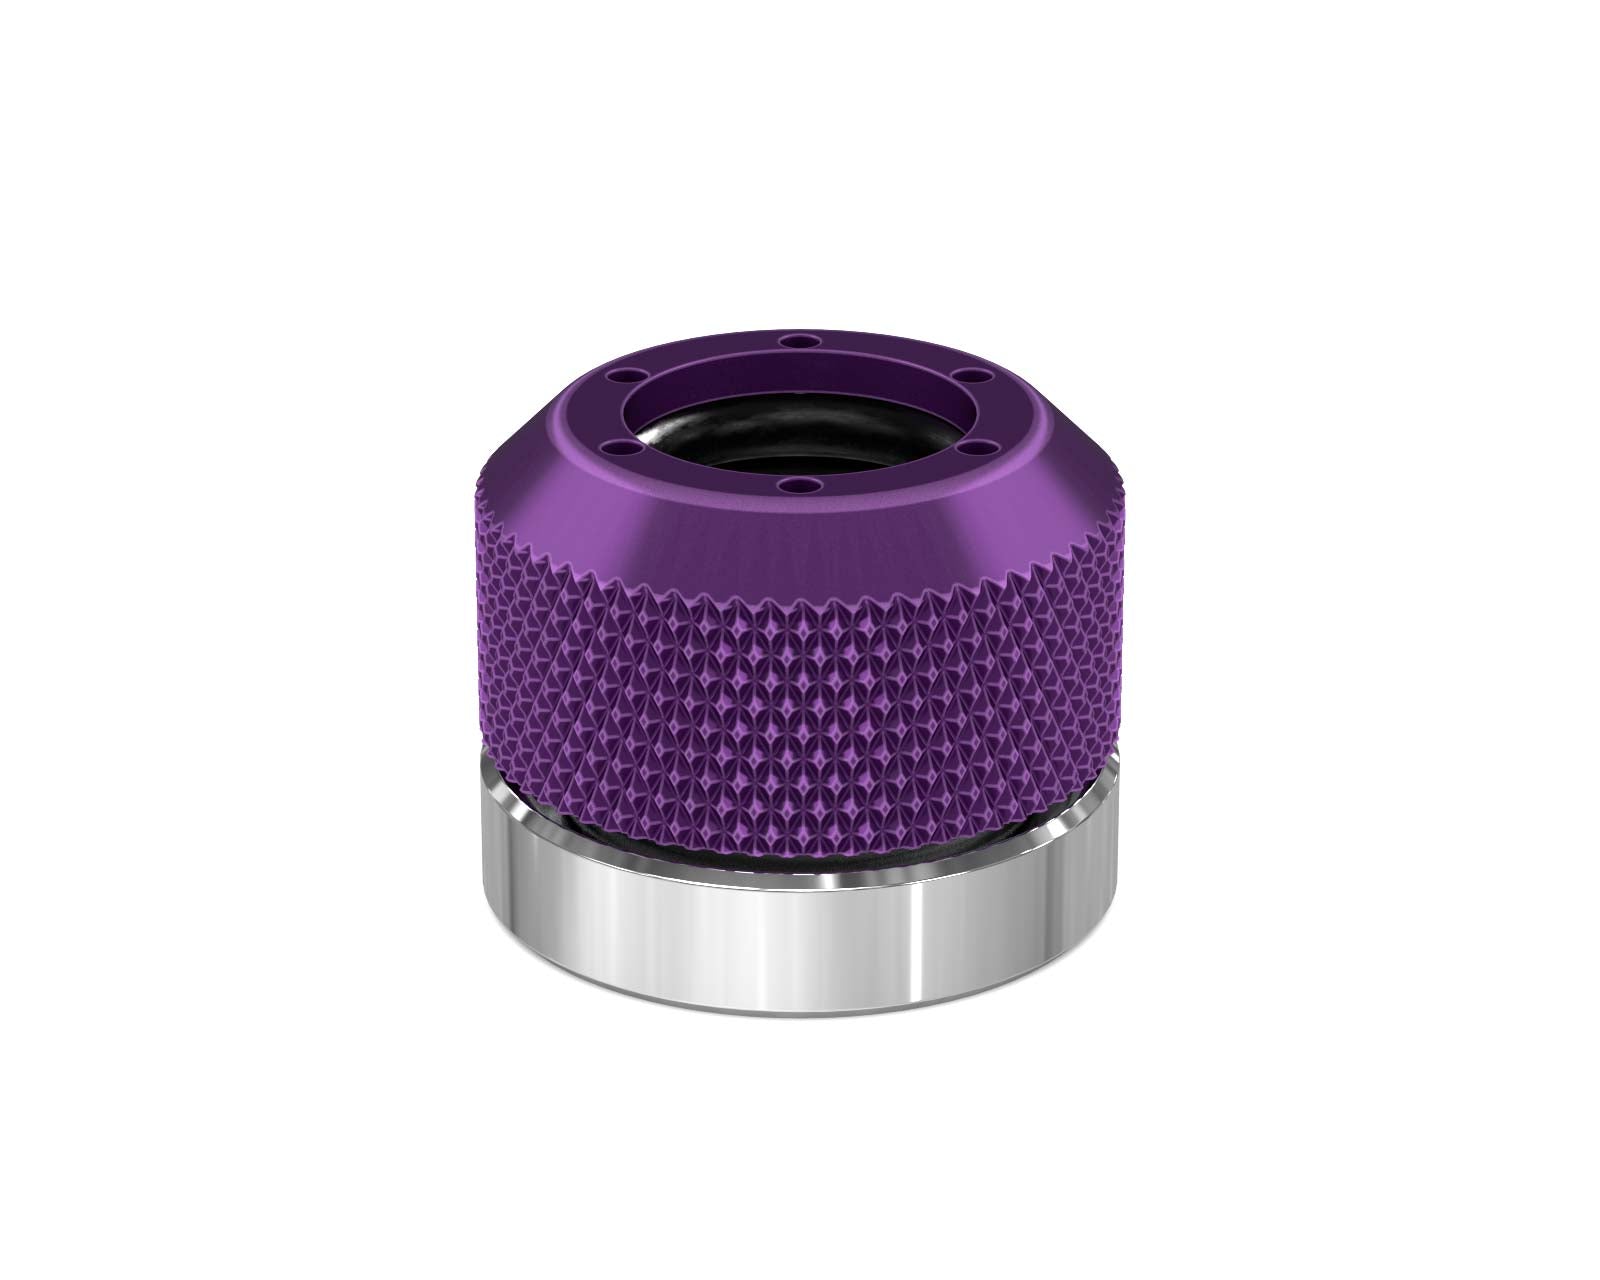 PrimoChill 1/2in. Rigid RevolverSX Series Coupler G 1/4 Fitting - PrimoChill - KEEPING IT COOL Candy Purple